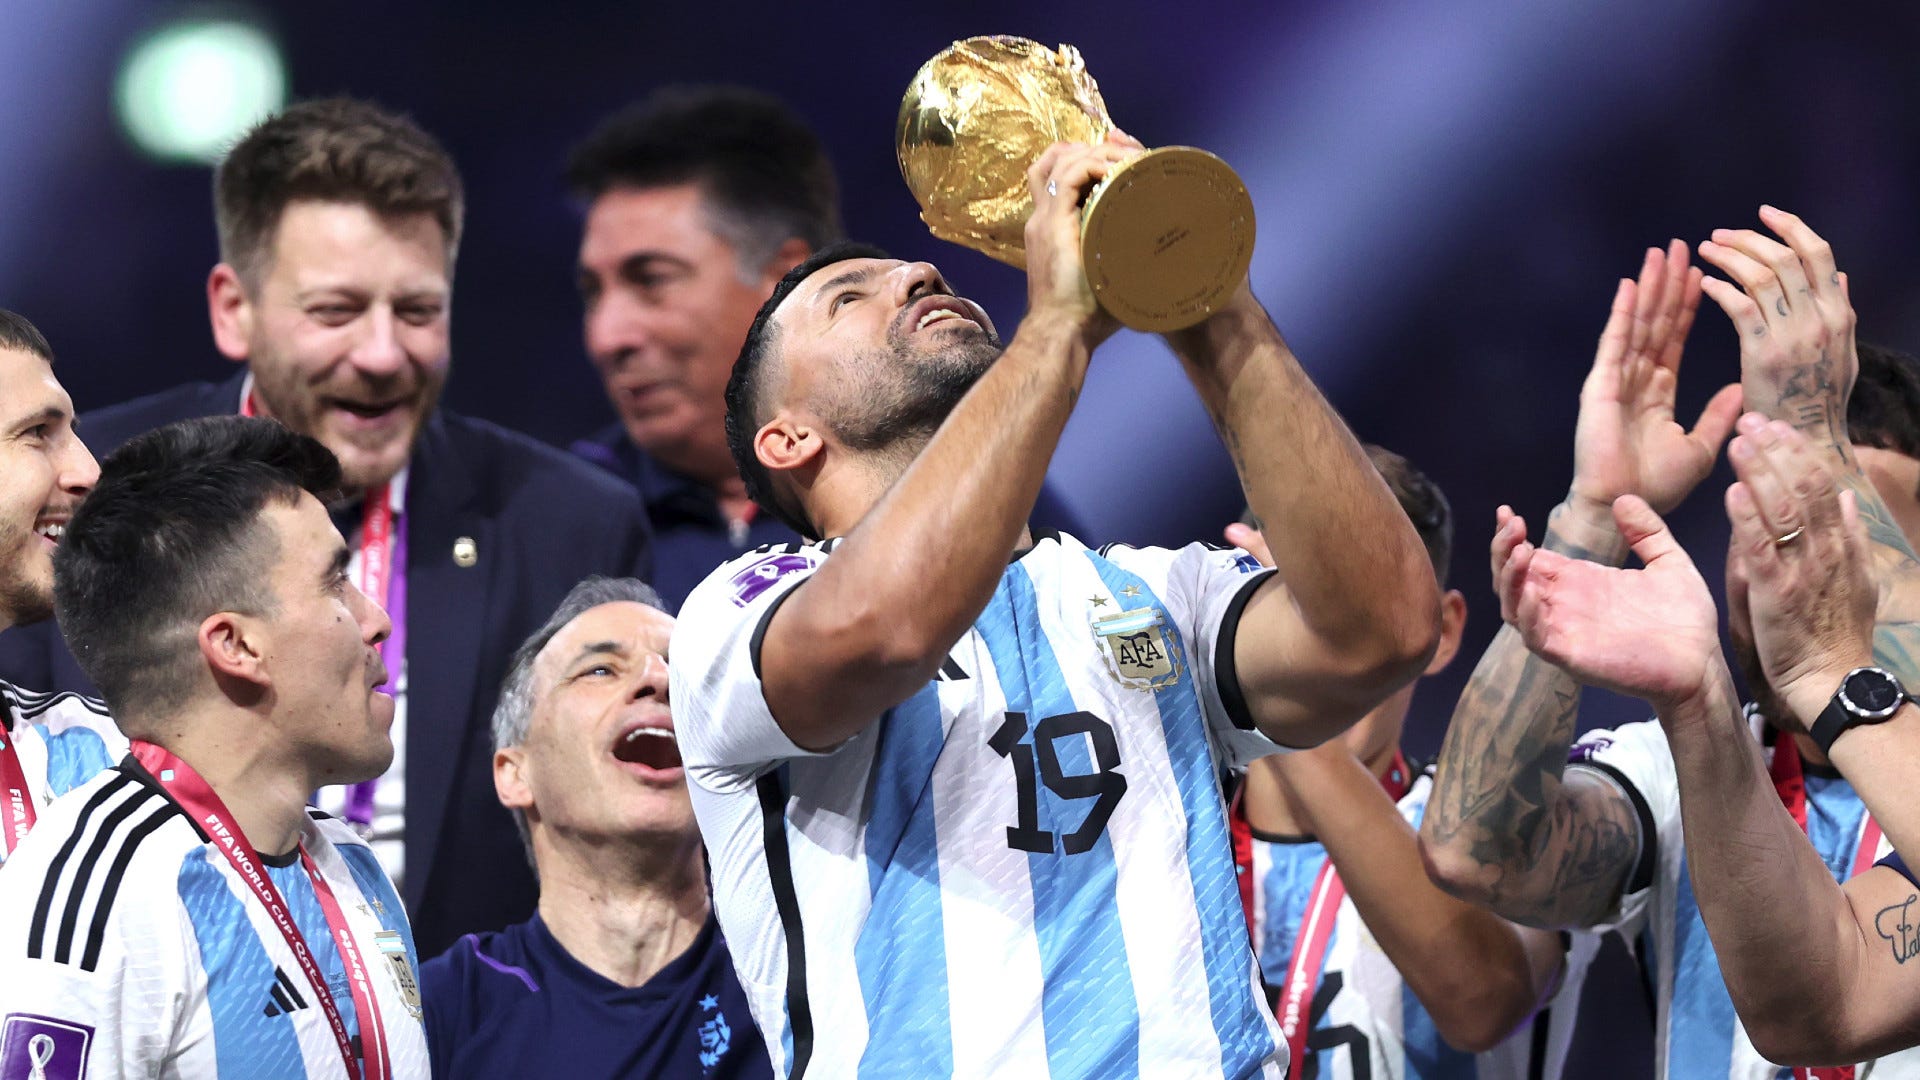 WATCH: Aguero gets to lift World Cup as retired Argentina striker joins in World Cup celebrations | Goal.com